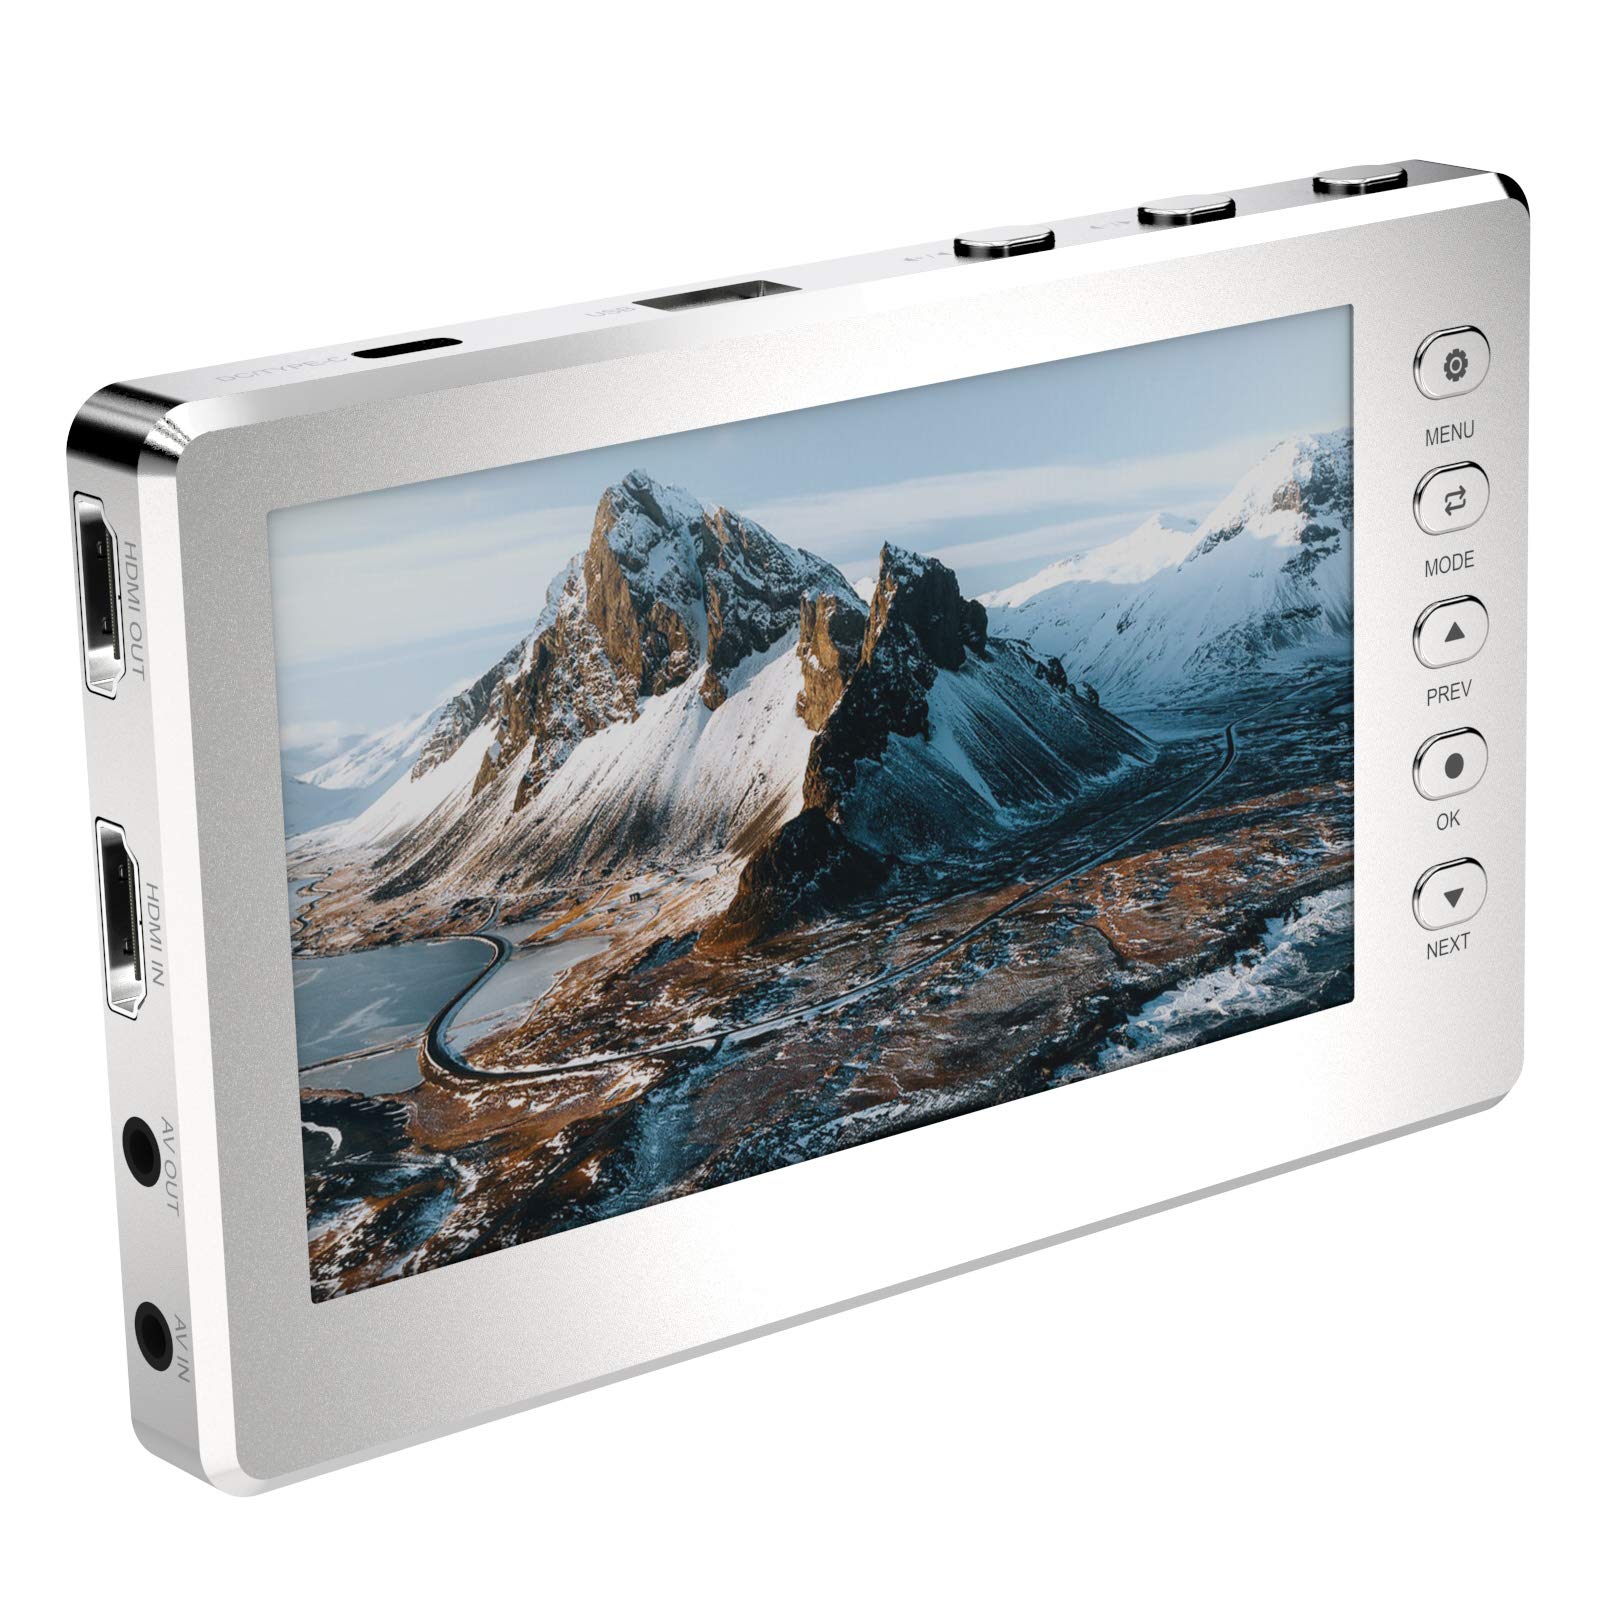 HD Video Capture Box 1080P 60FPS USB 2.0 with 5" OLED Screen Black